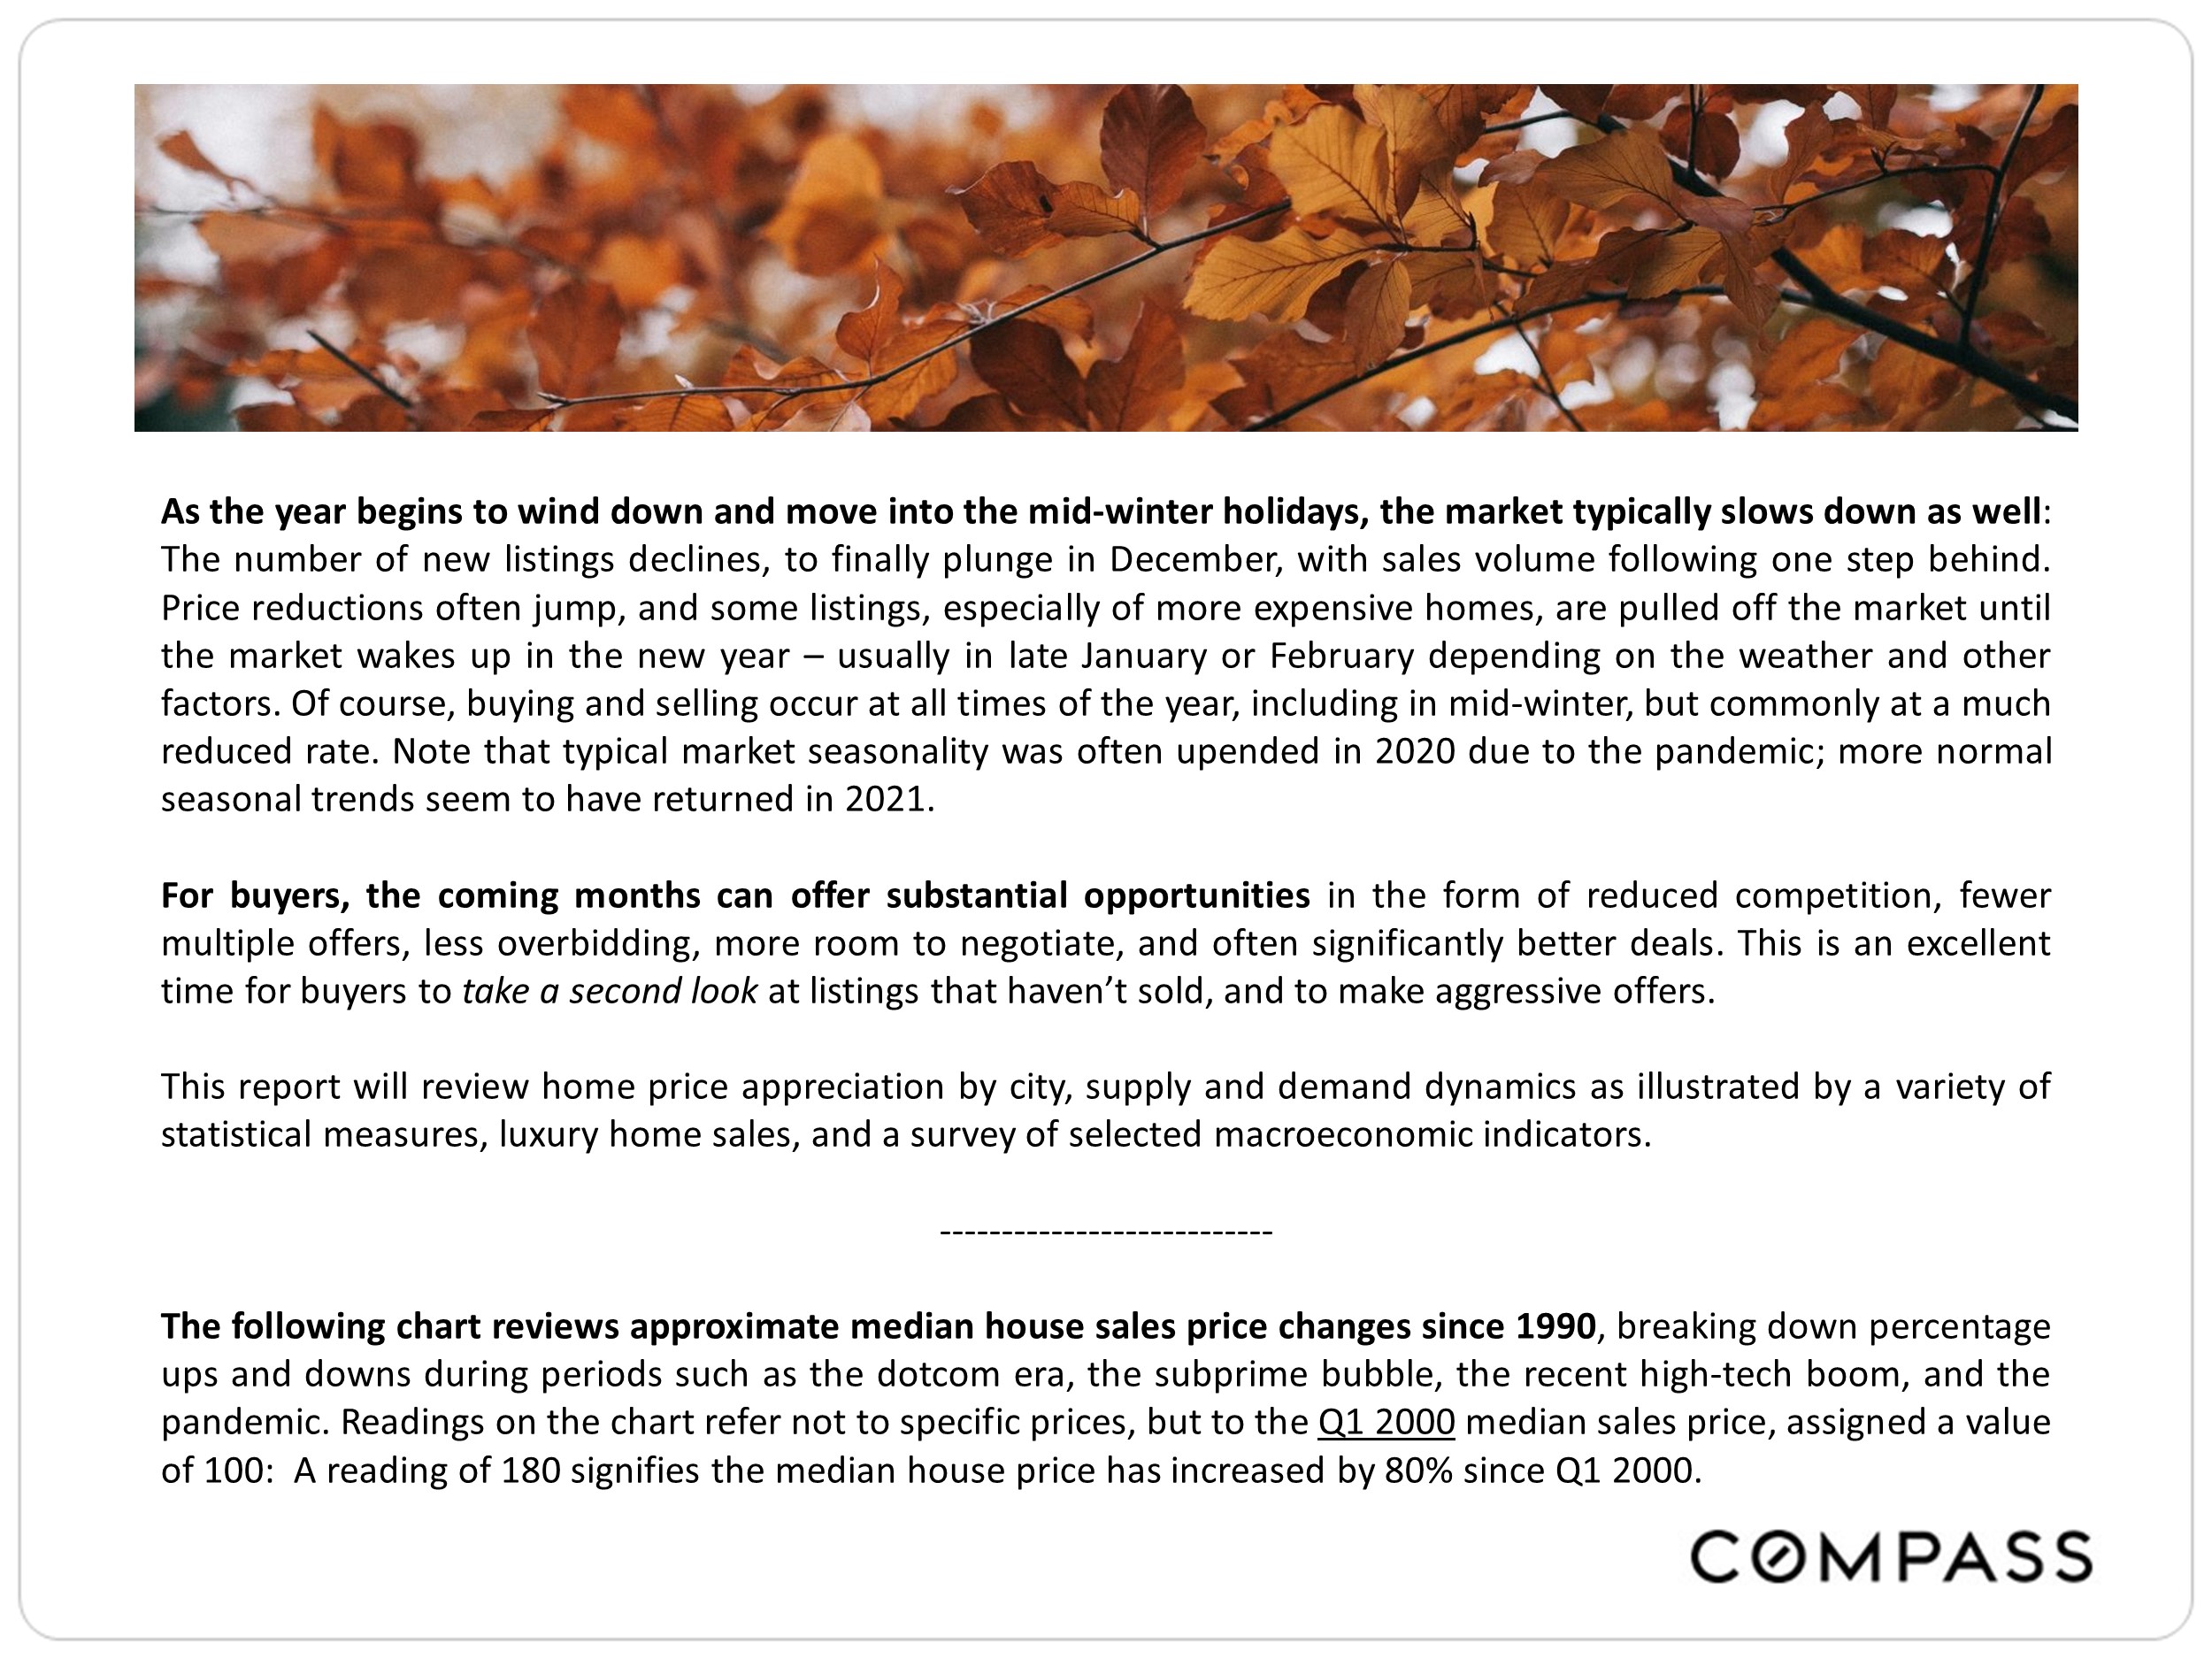 banner image of fall leaves and intro text about the seasonality of the market